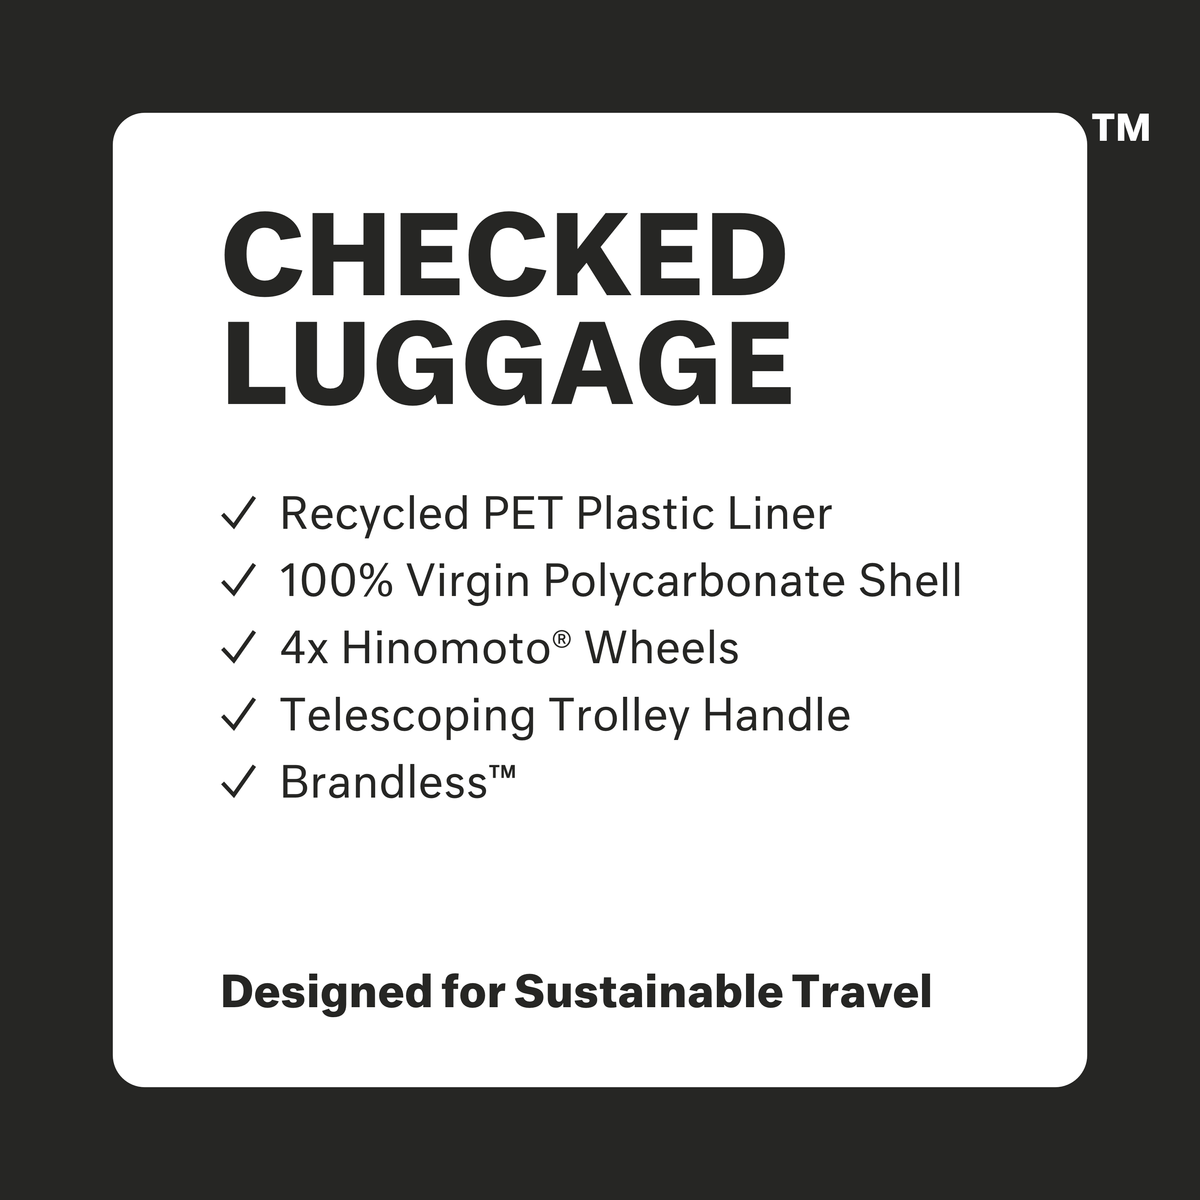 Checked Luggage: recycled PET plastic liner, 100% virgin polycarbonate shell, 4x Hinomoto Wheels, Telescoping Trolley Handle, Brandless, Designed for Sustainable Travel.